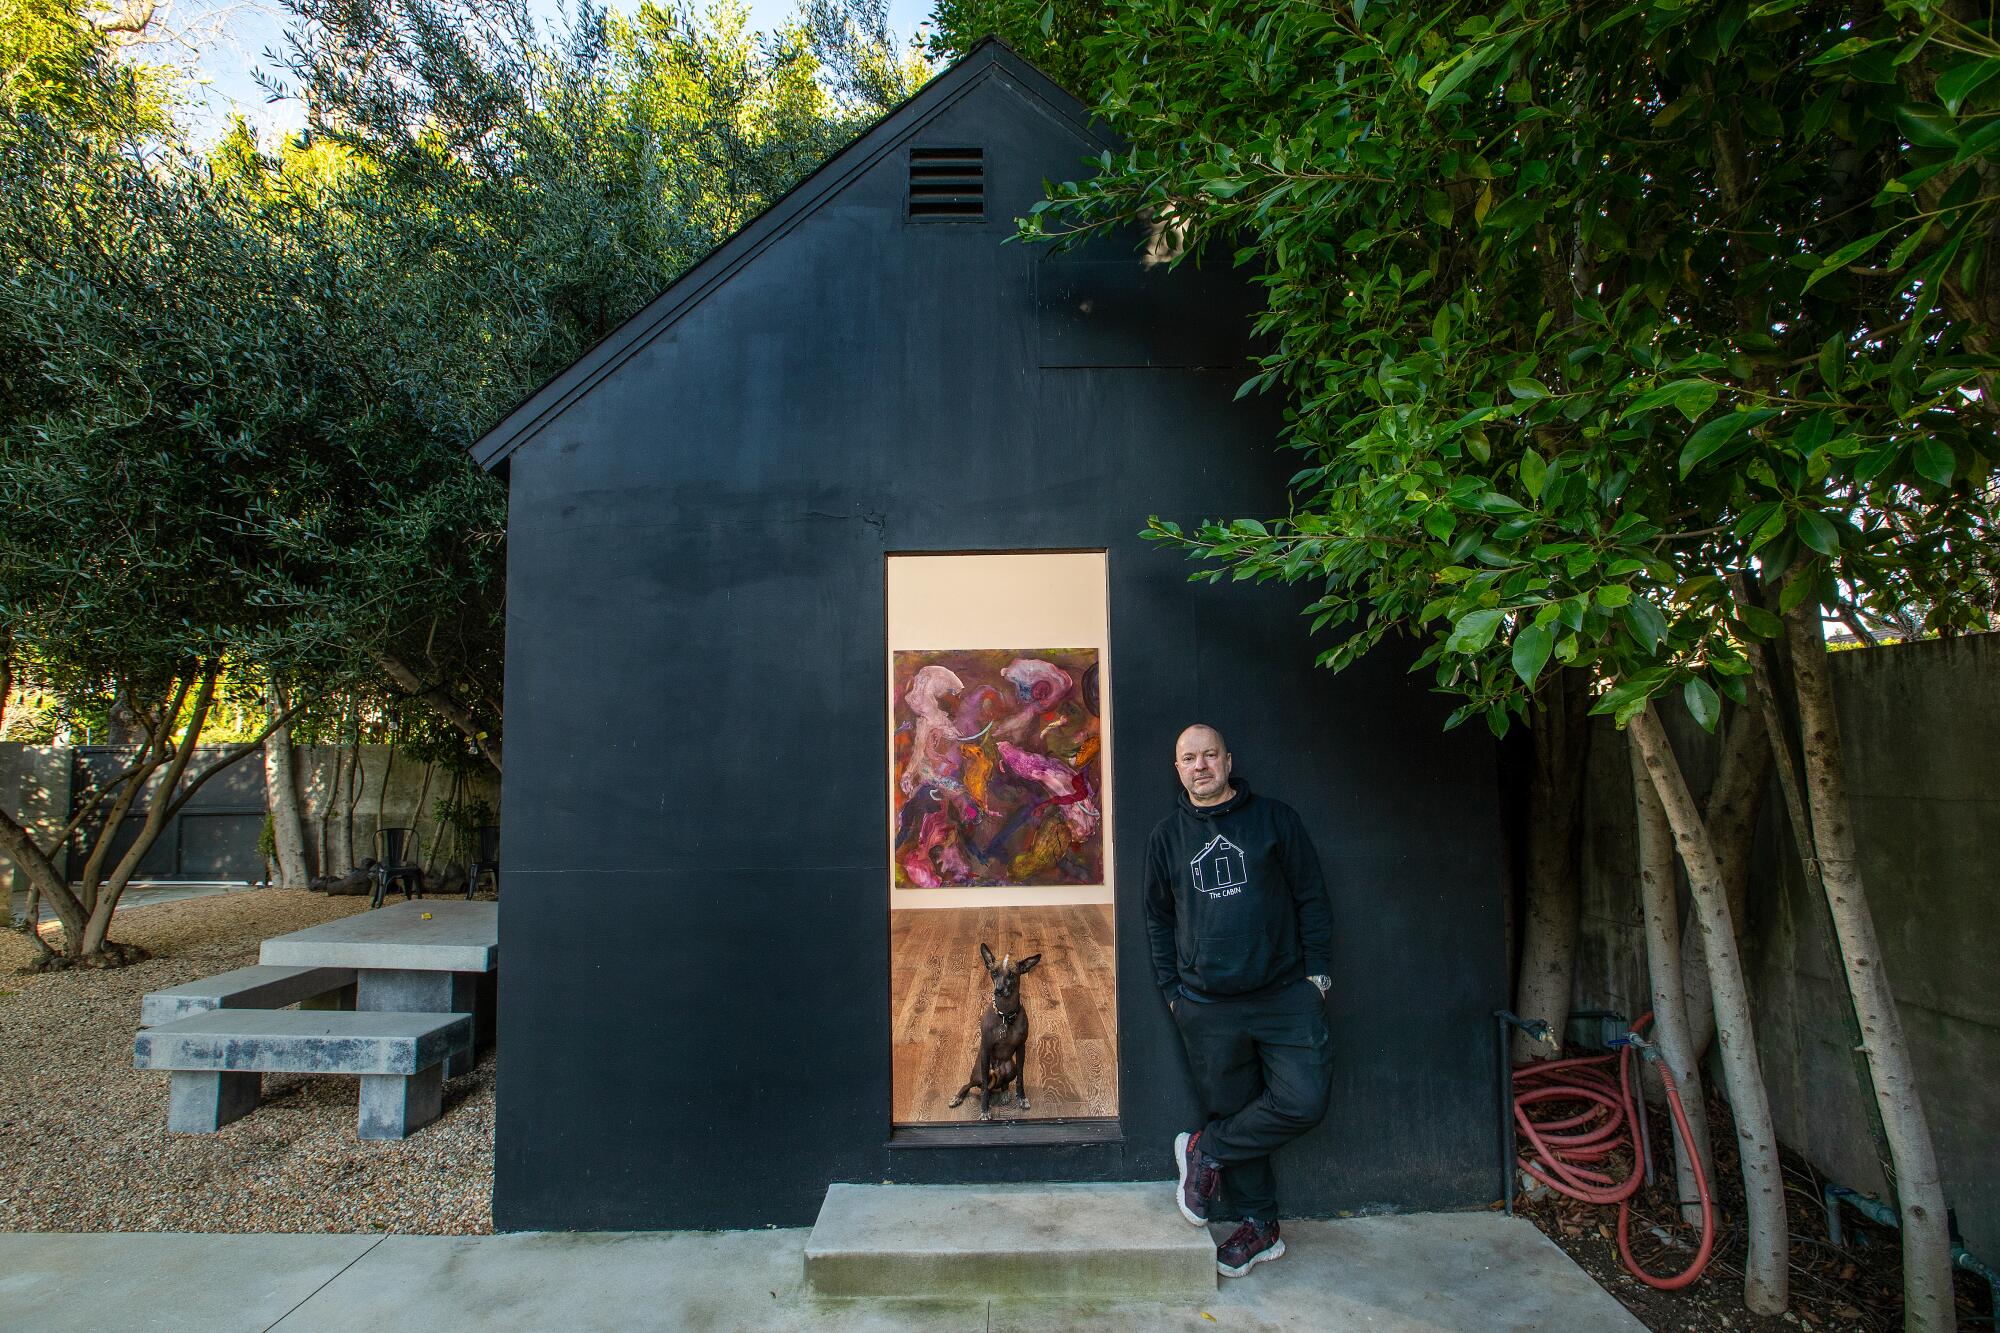 A man stands outside a small building, painted black, with a dog and paintings visible through its open door